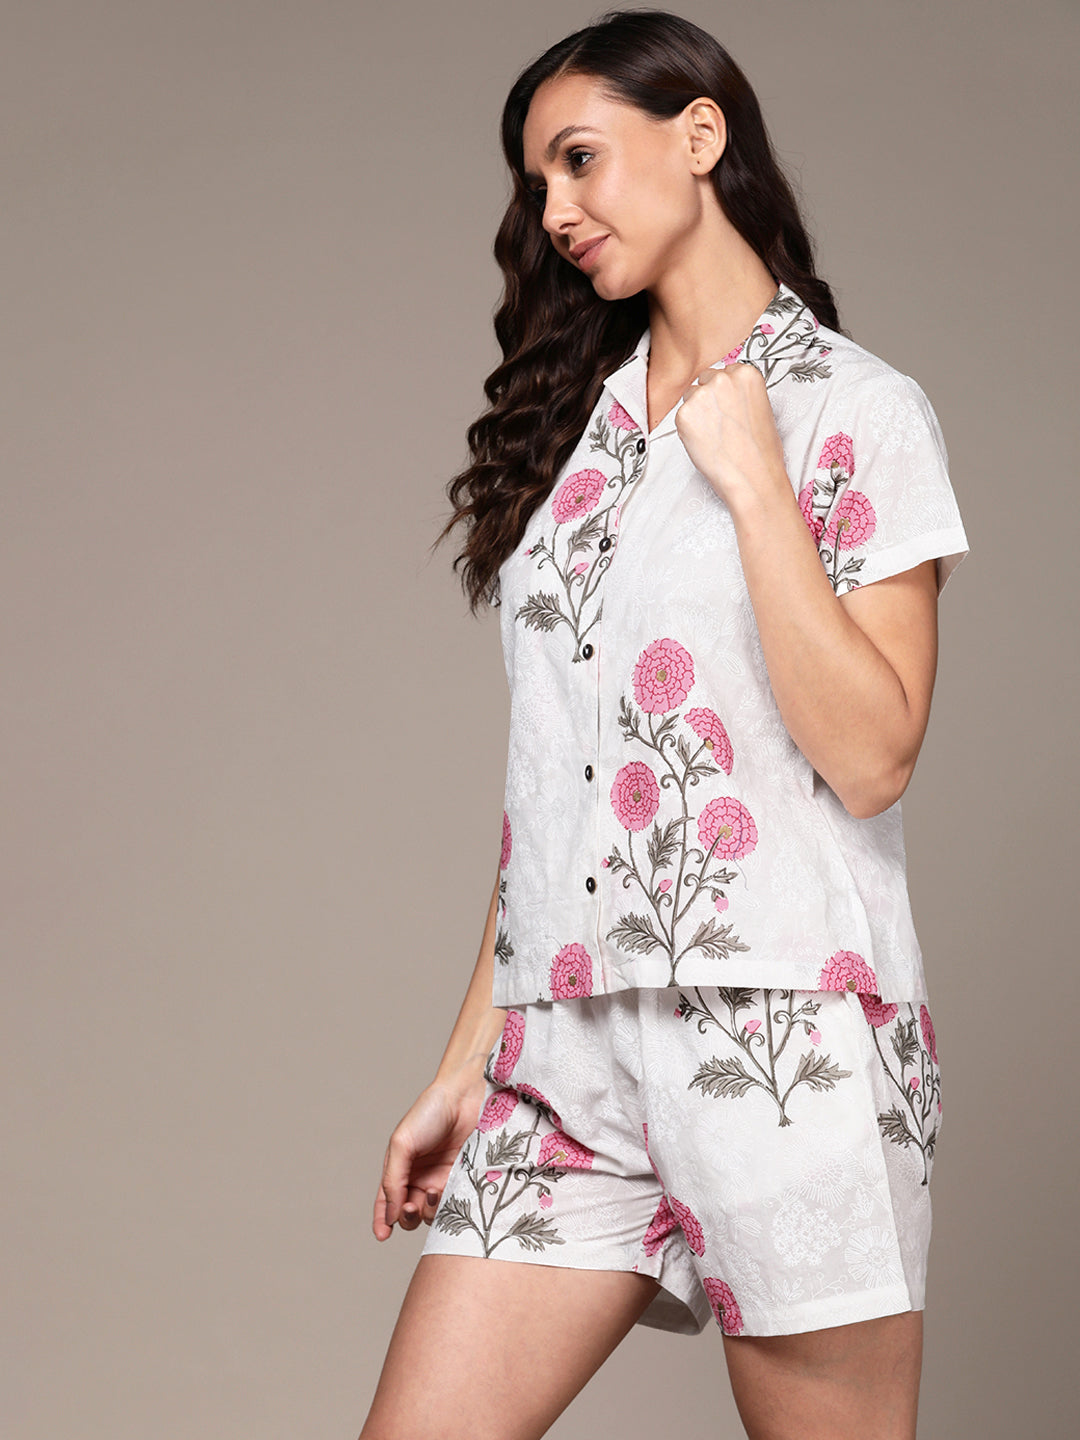 Women's's White Floral Printed Pure Cotton Night Suit